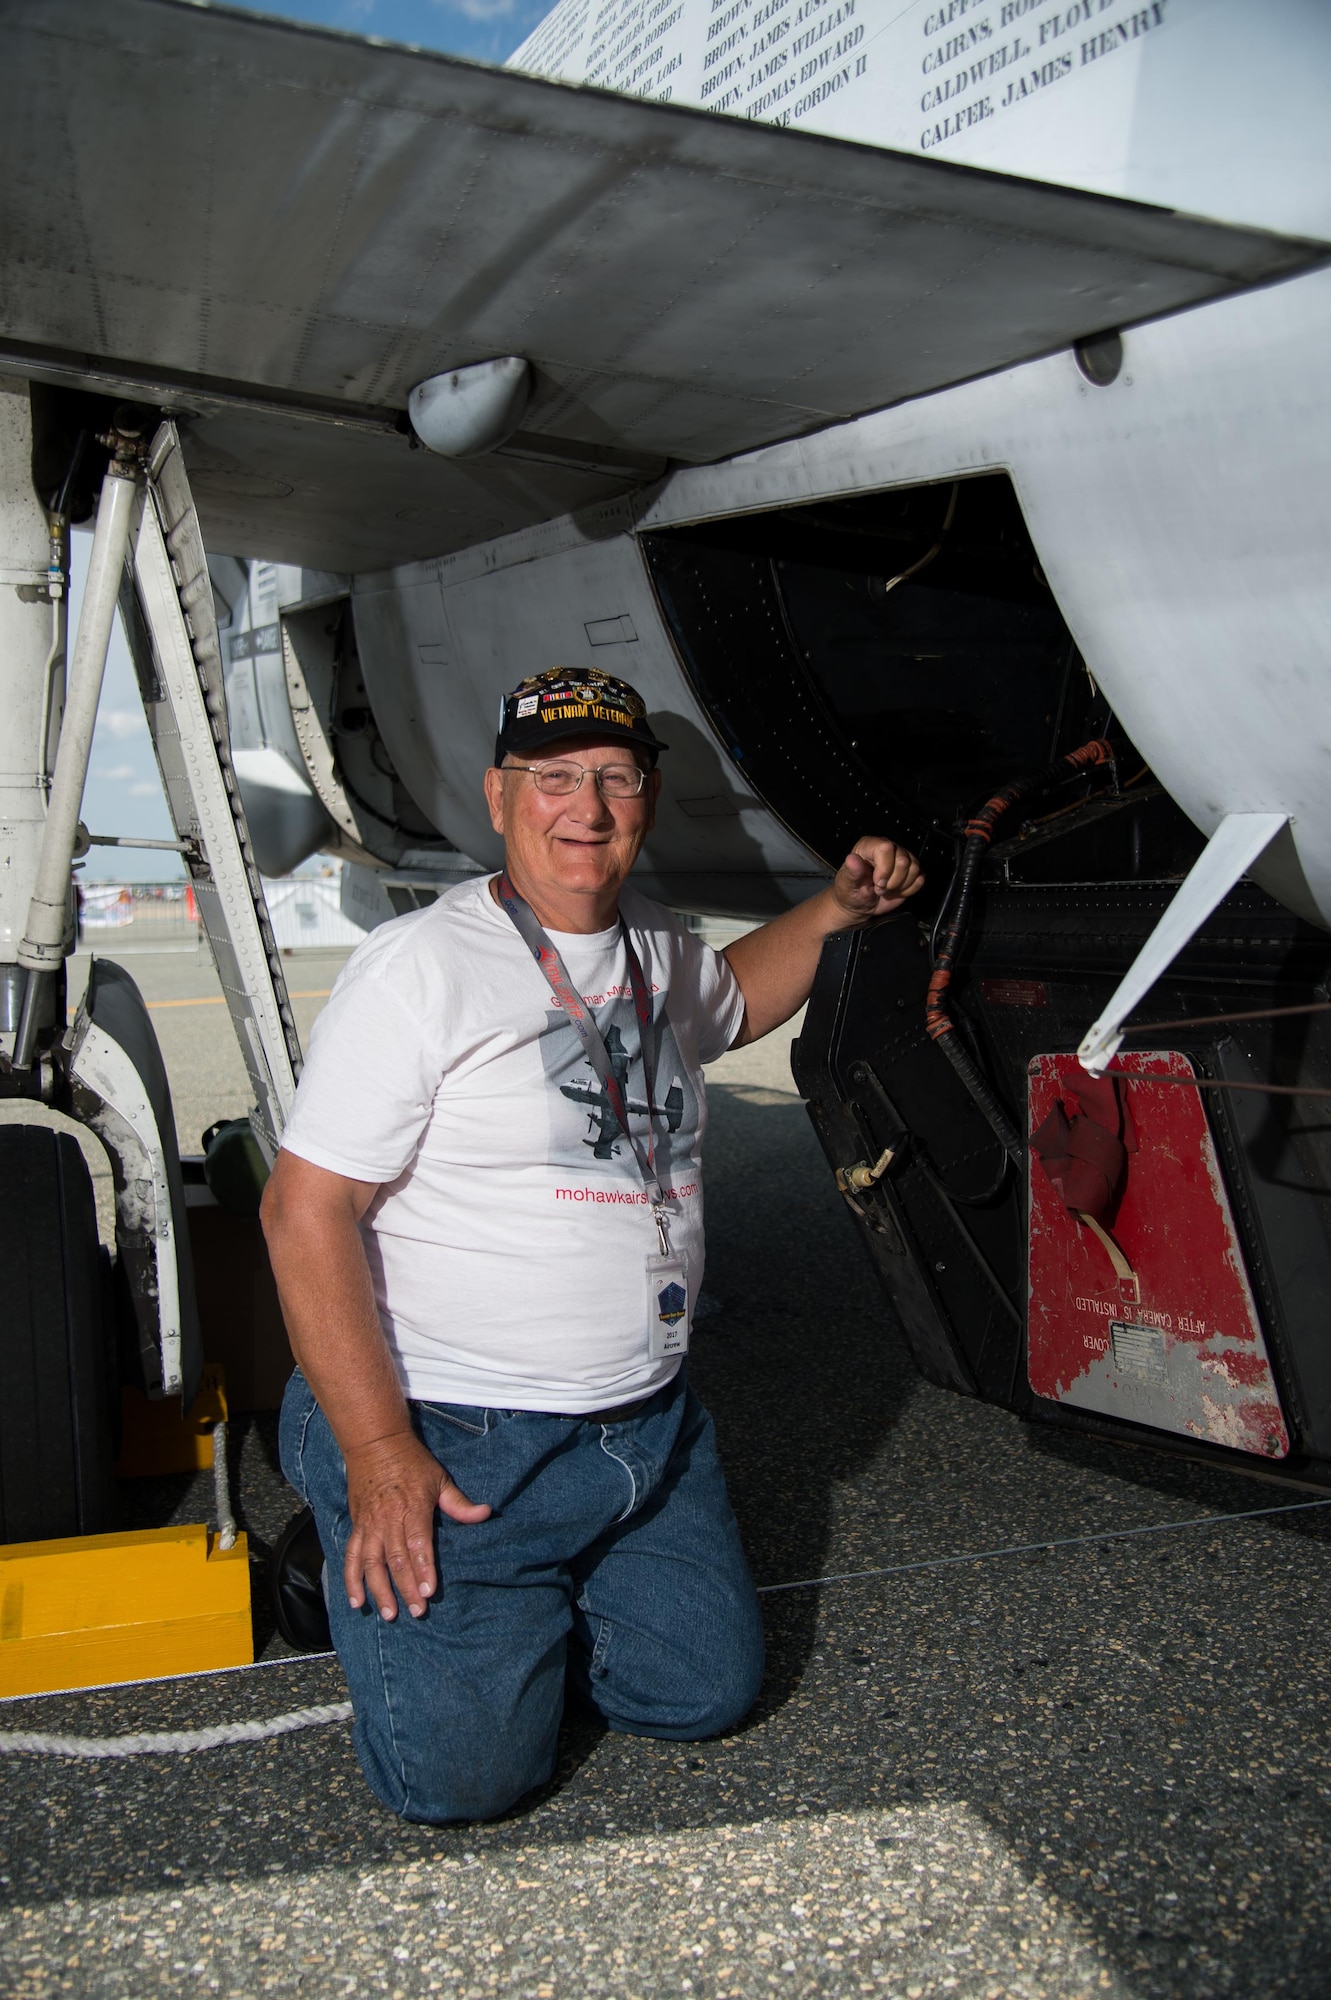 Wayne Klotz, an Army veteran, shows where the camera film was fitted on an Army OV-1 Mohawk observation and surveillance aircraft Aug. 27, 2017, during the Thunder Over Dover Open House at Dover Air Force Base, Del. Klotz operated the camera and reconnaissance instruments in an OV-1 during the Vietnam War. (U.S. Air Force photo by Mauricio Campino)